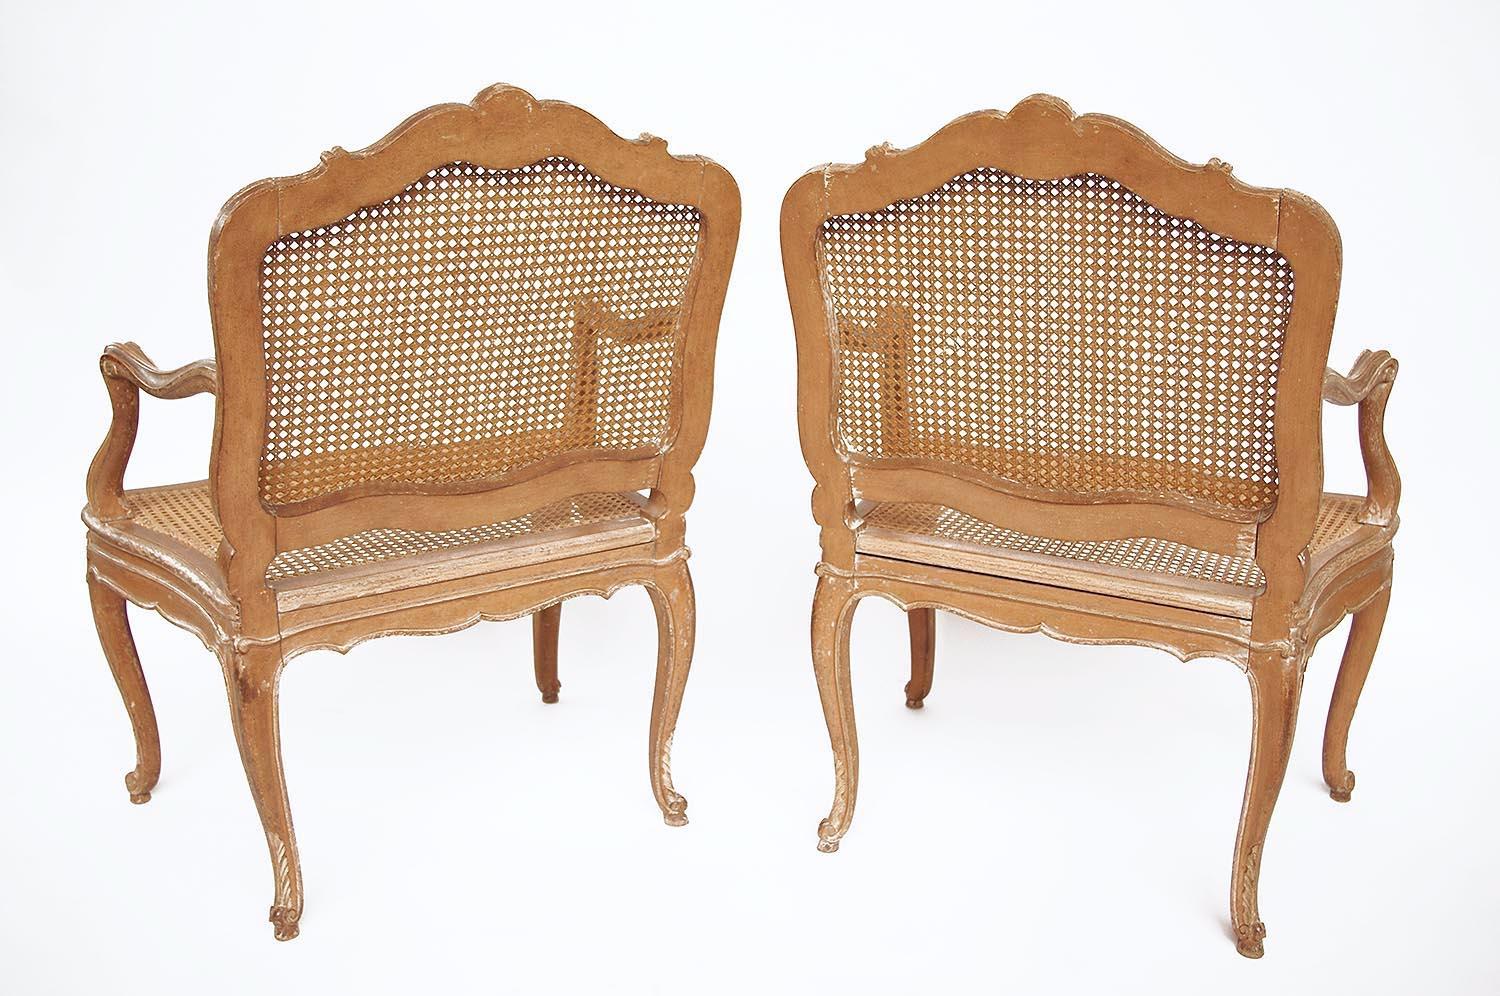 Pair of à la Reine Louis XV style canned armchairs in carved and cream lacquered wood standing on four cabriole legs with a decor of stylized cartouche and acanthus leaves, finishing by a scroll supported by a small shoe.
A la Reine canned back and